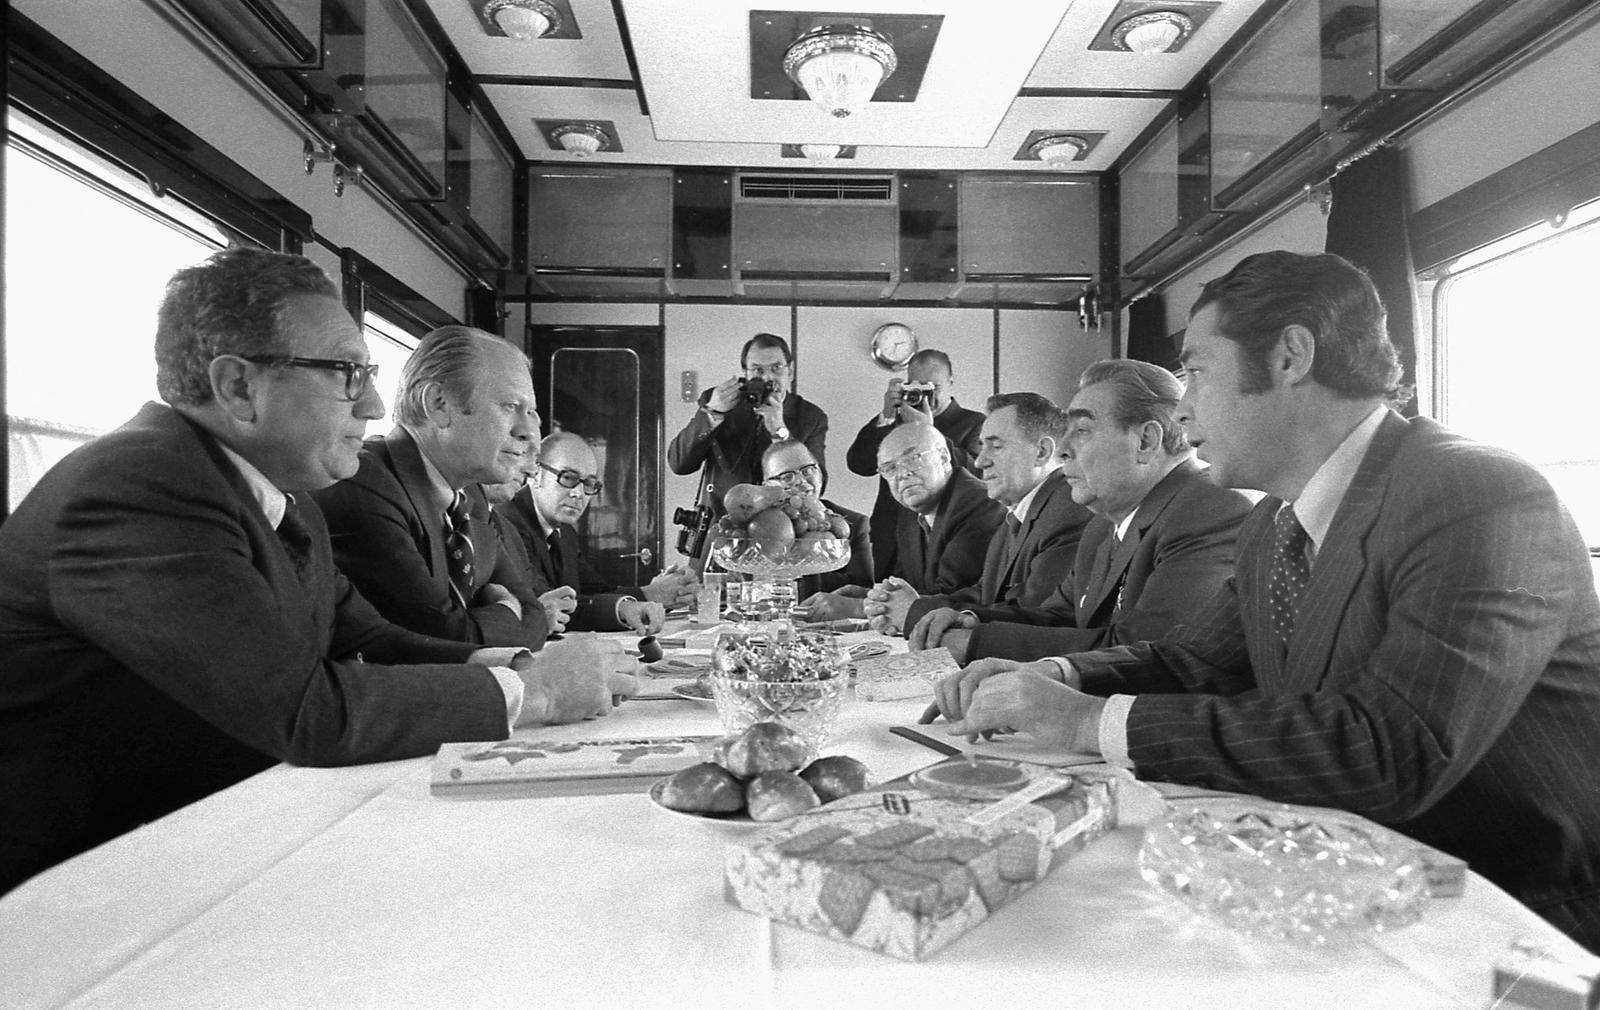 U.S. President Gerald Ford, Secretary of State Henry Kissinger and other U.S. representatives meet with Soviet General Secretary Brezhnev, Foreign Secretary Gromyko, Ambassador Dobrynin, and others aboard a Russian train headed for Vladivostok